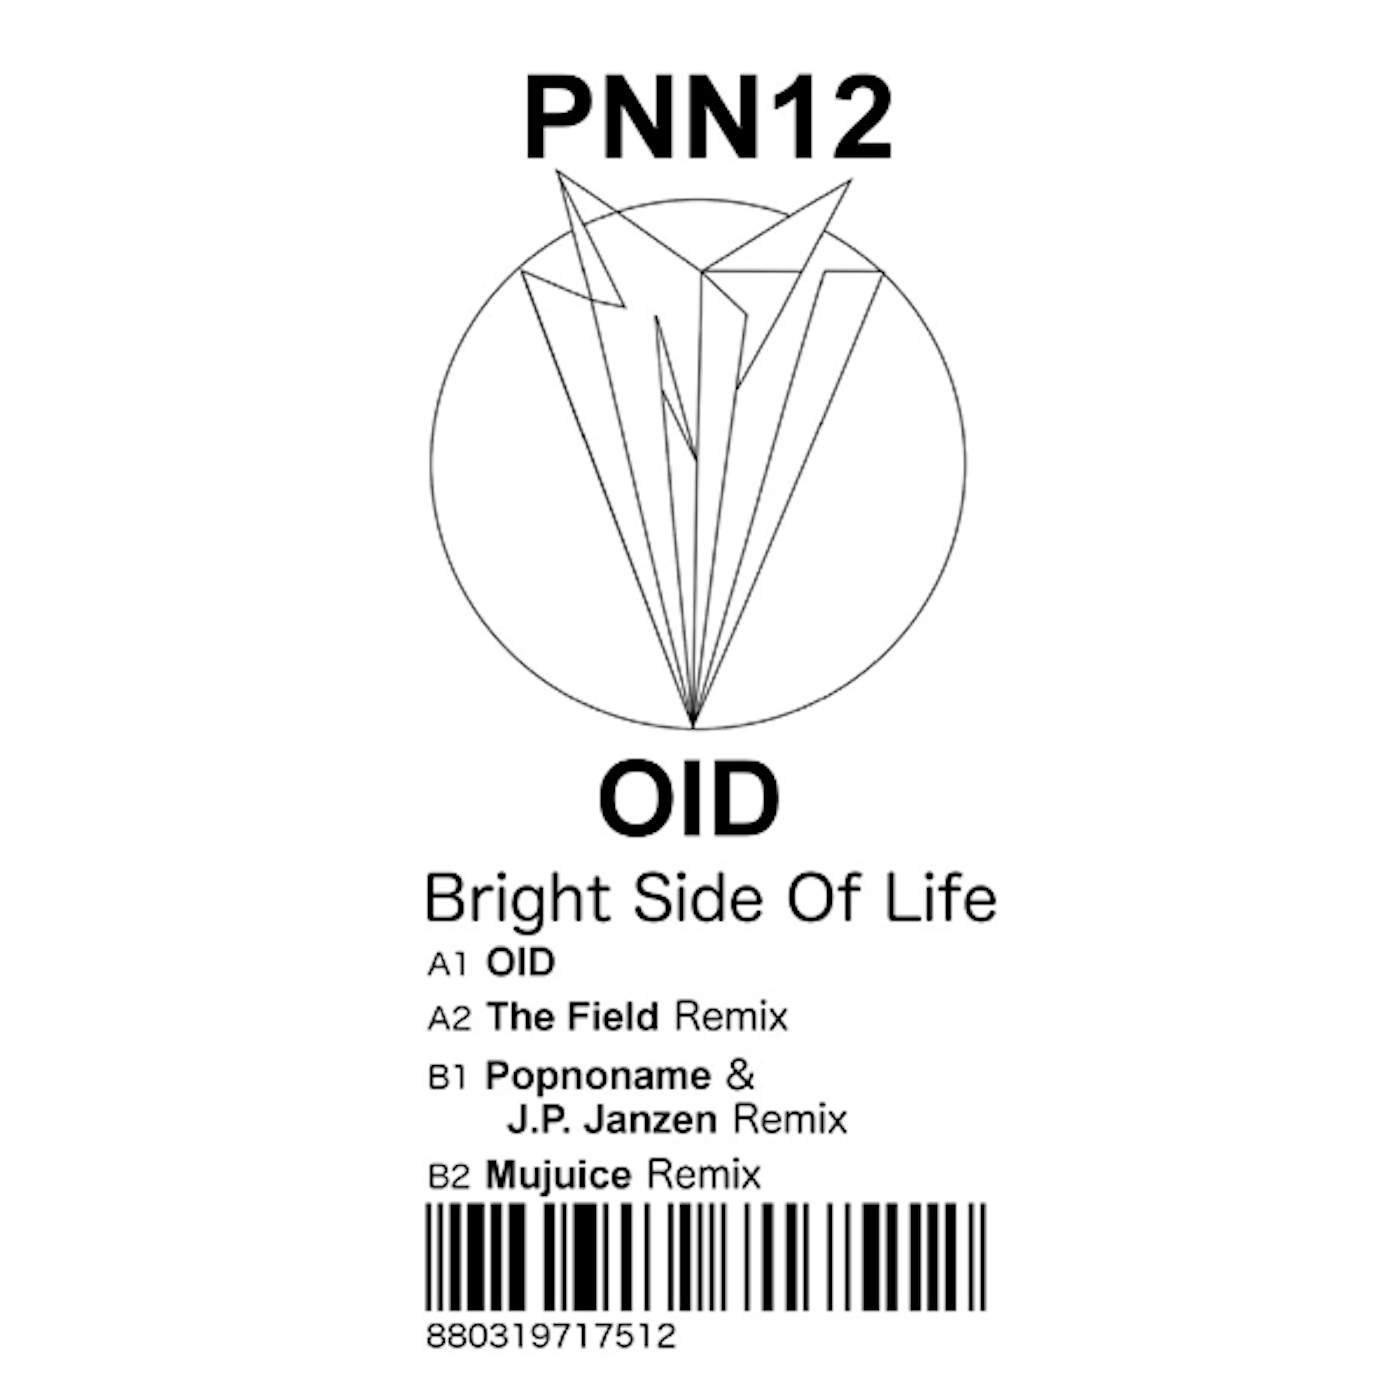 OID Bright Side of Life Vinyl Record